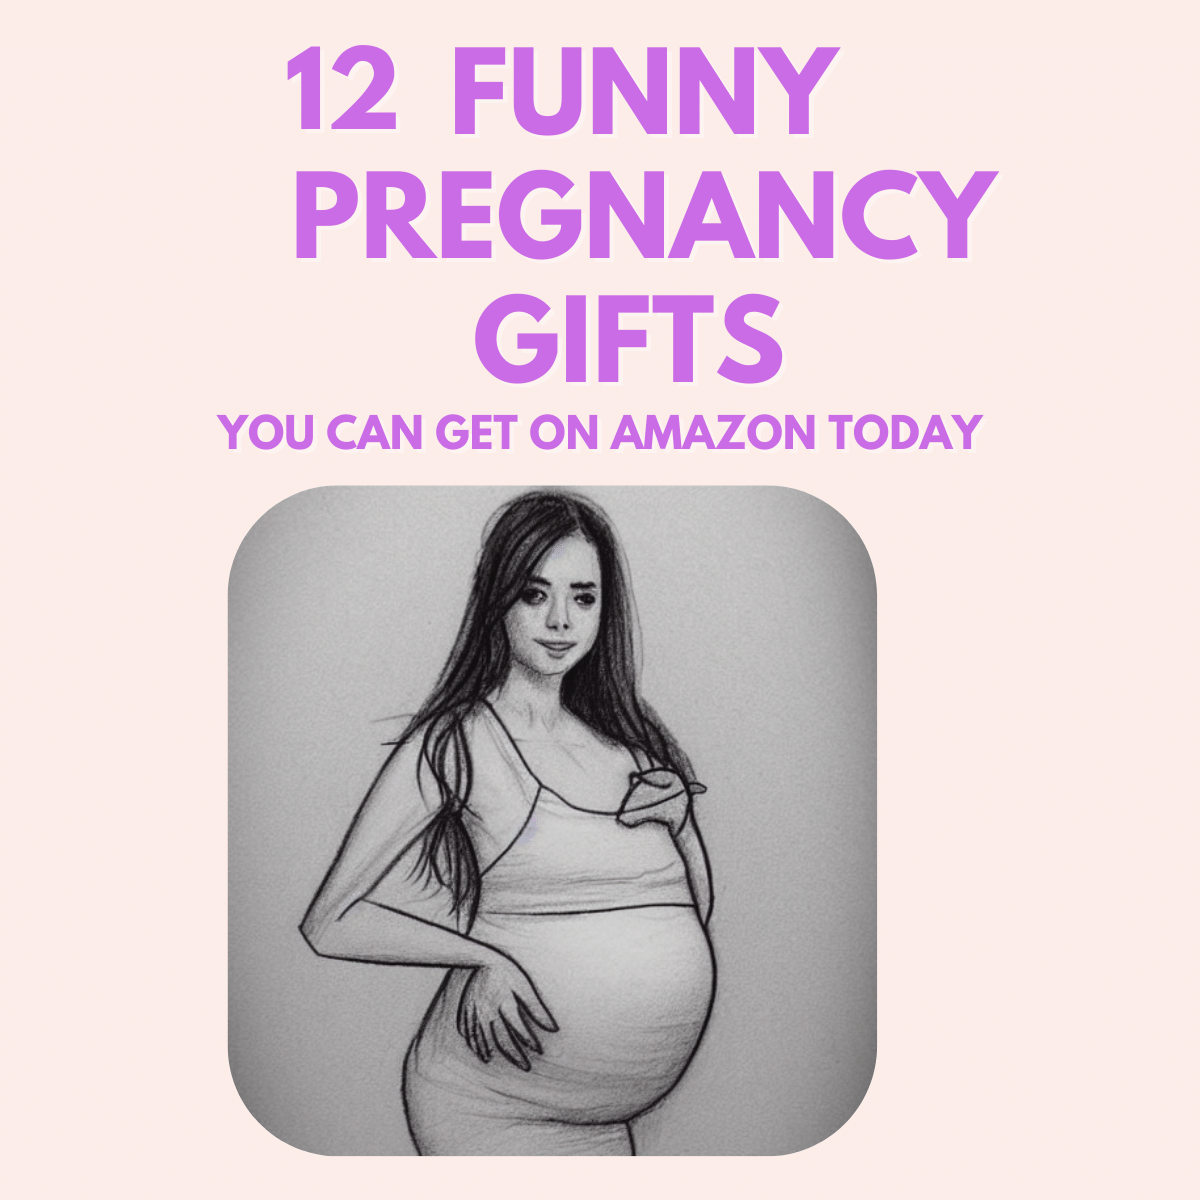 12 Funny Pregnancy Gifts you can get on Amazon Today